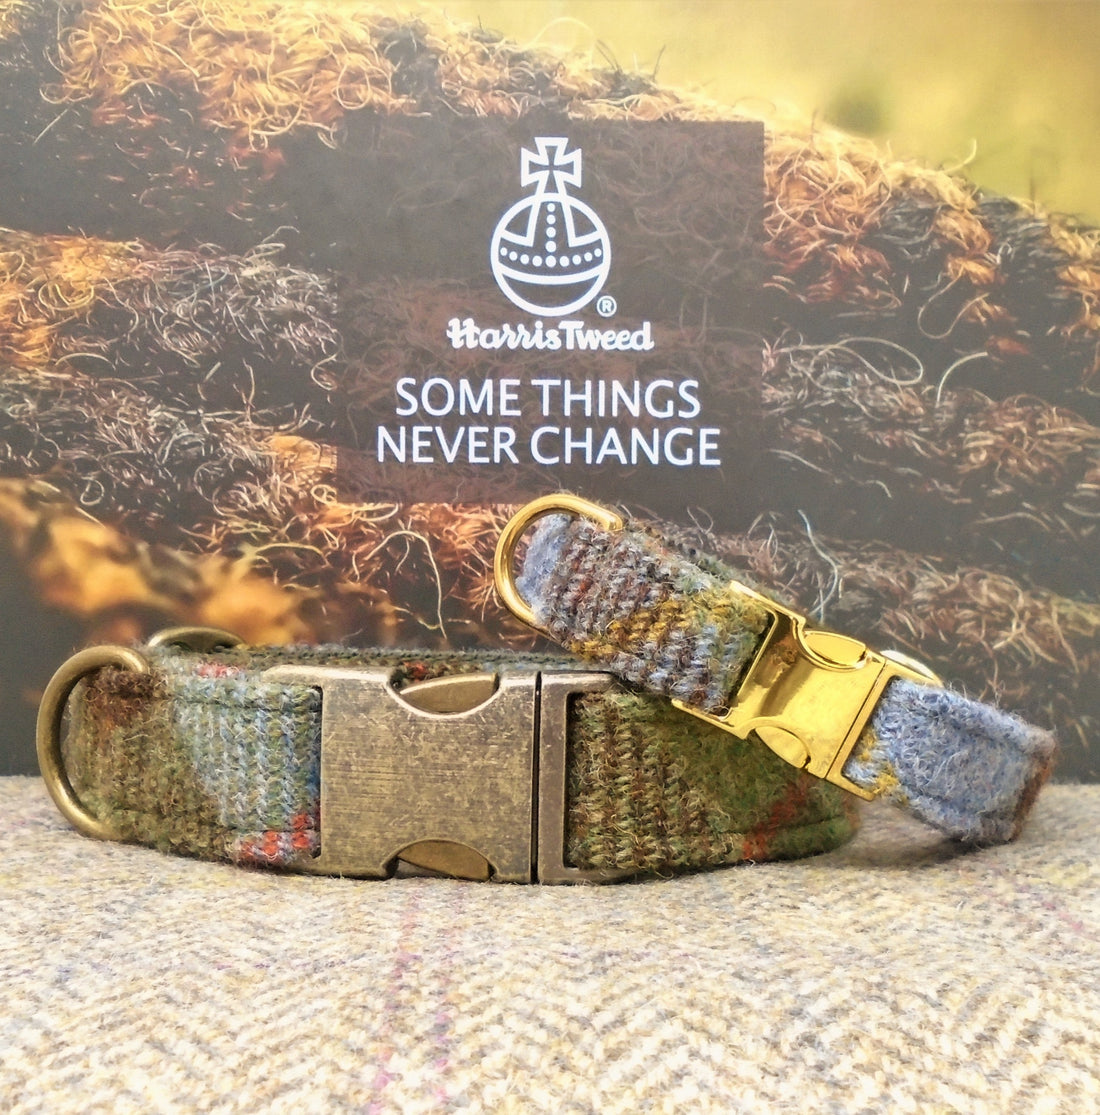 macleod scottish tartan genuine harris tweed dog collars, blue green tartan. Optional to have dogs name on this collar, gold lettering, silver lettering or neutral deboss on veg tan leather